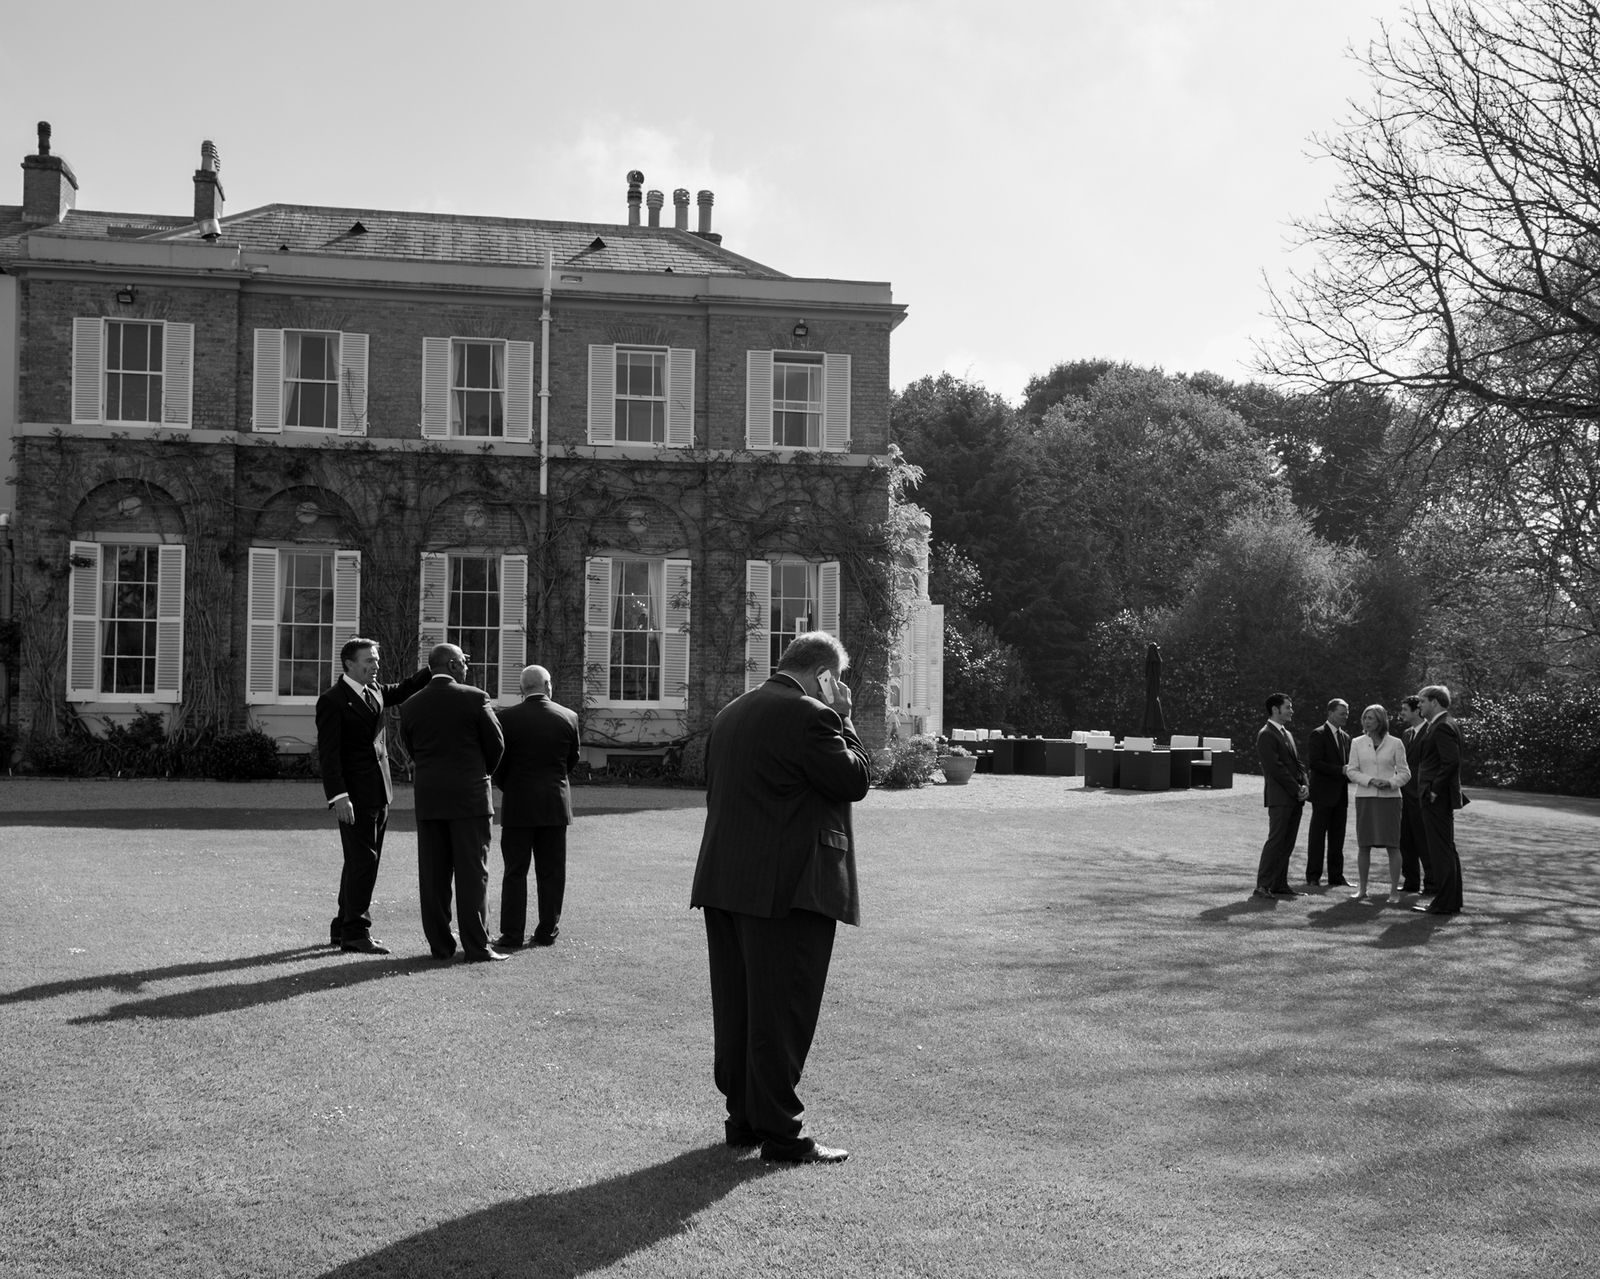 © Martin Toft - Official visit at the Government House, St Saviour, Jersey. 21 April 2015 © Martin Toft